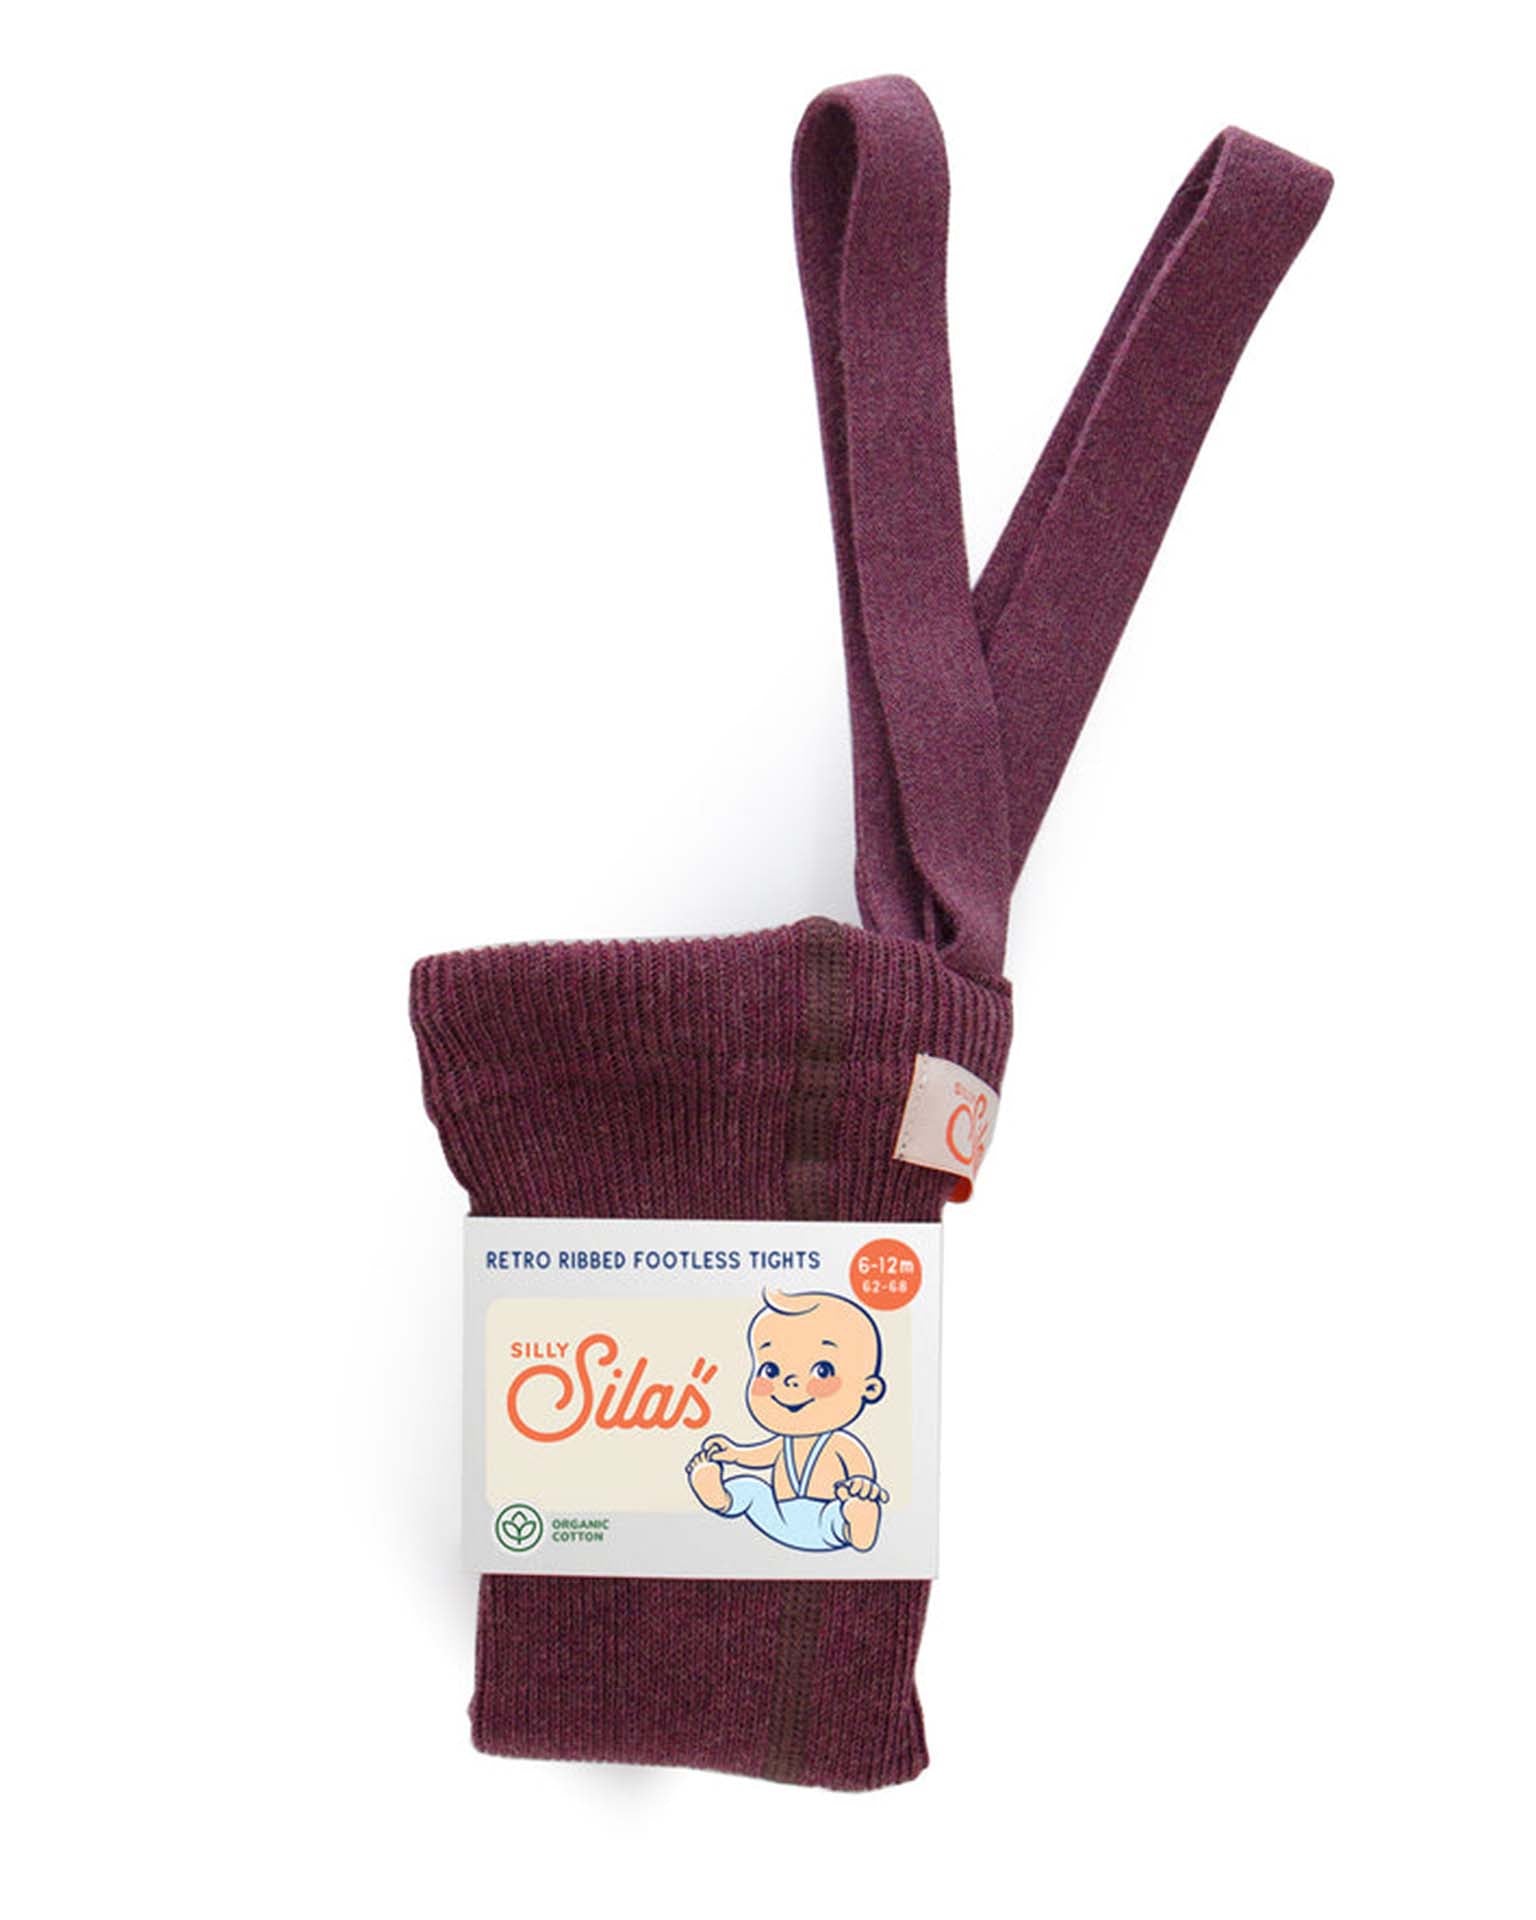 Little silly silas accessories retro footless tights in fig blend